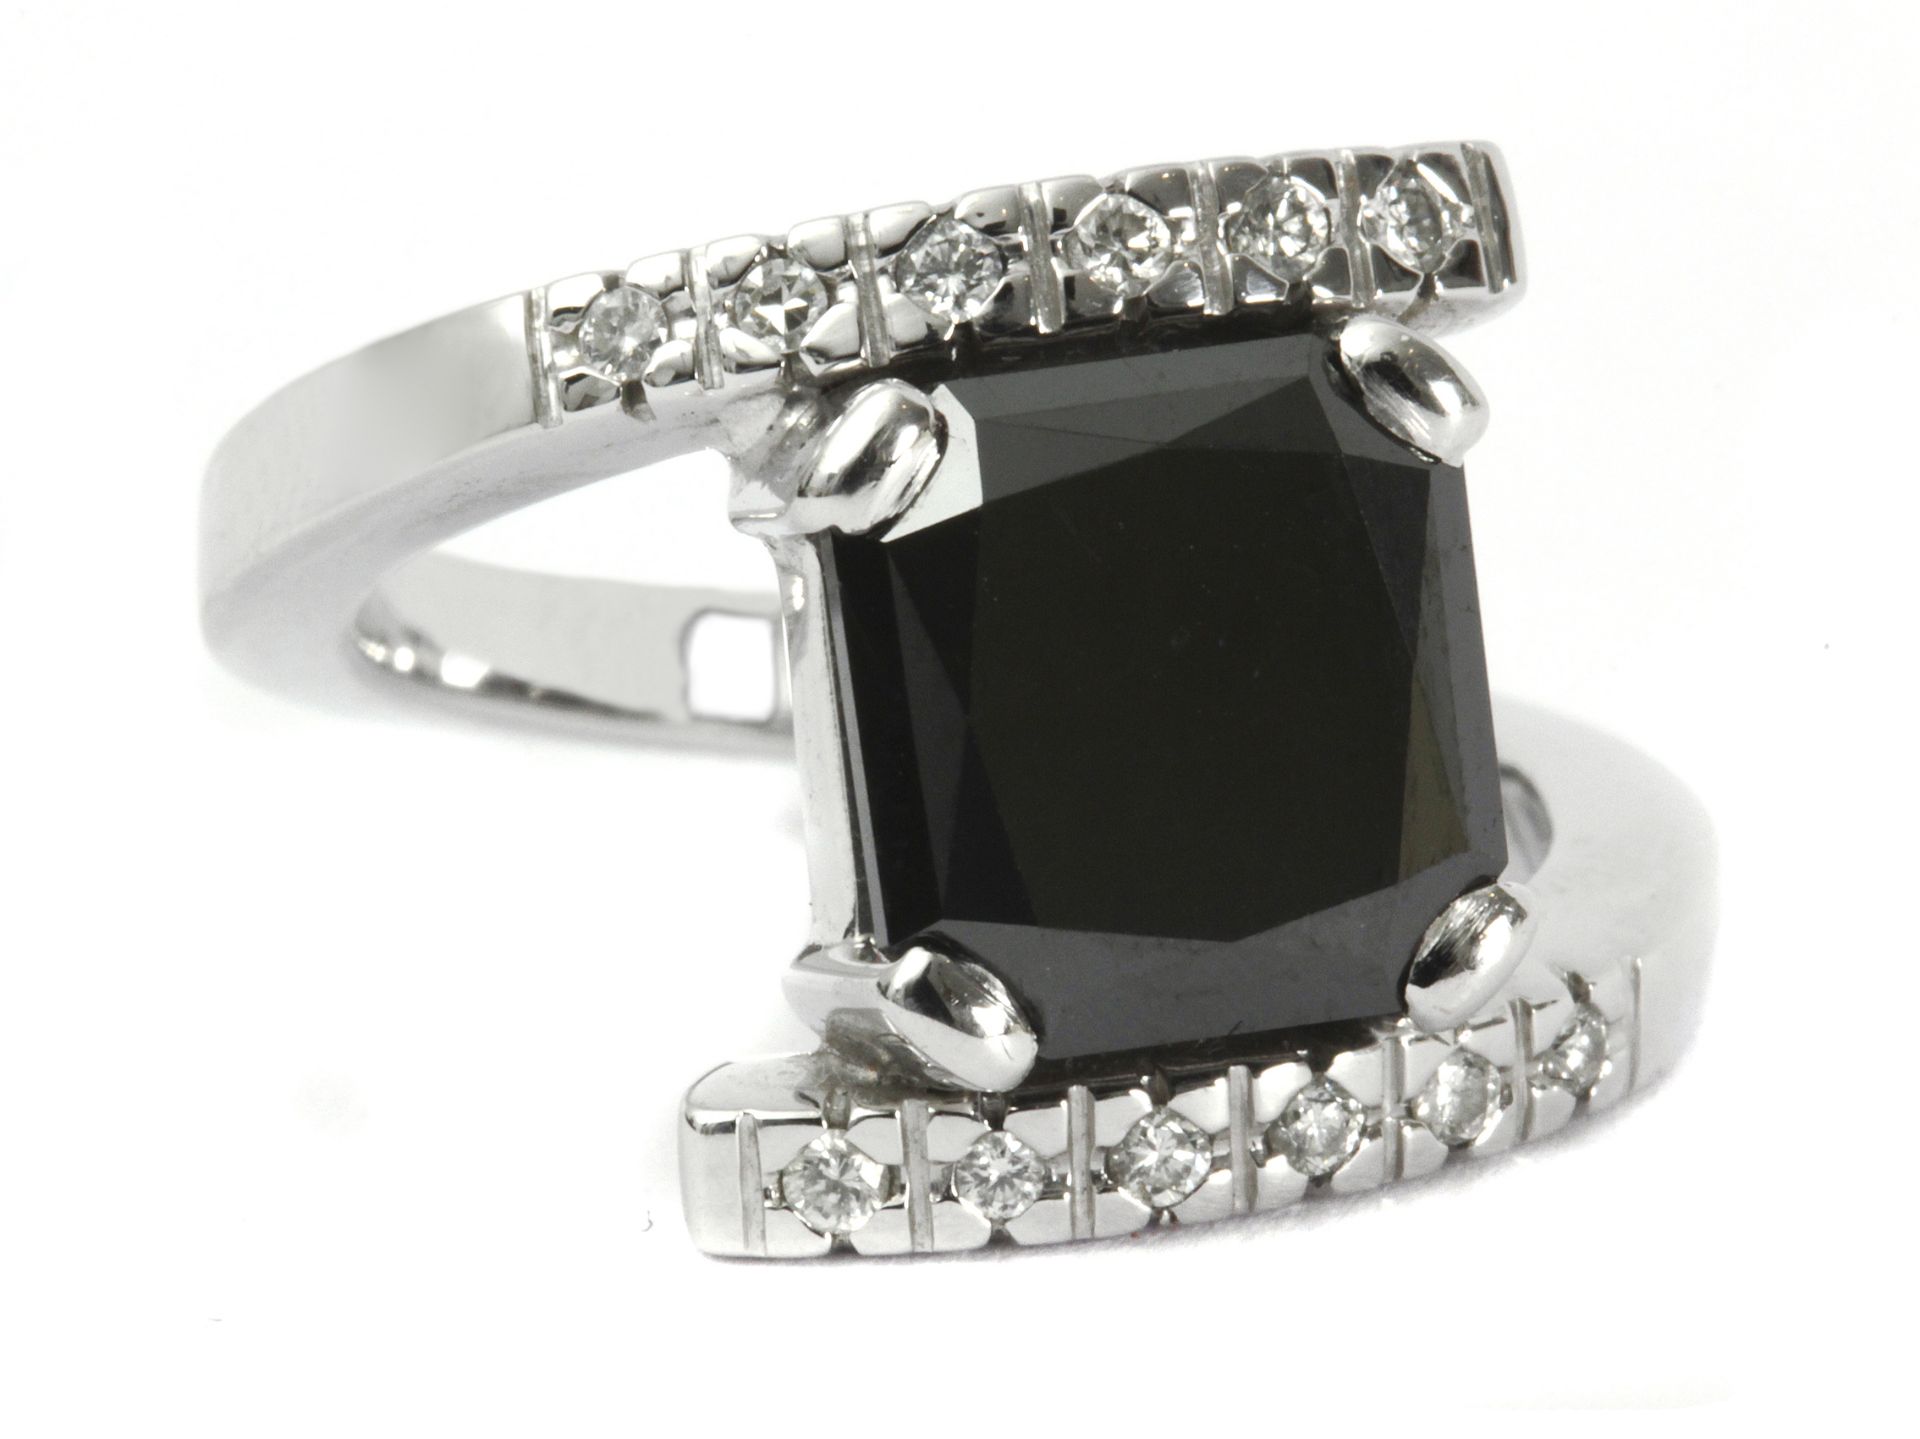 Black diamond and colourless diamonds ring with an 18k. white gold setting